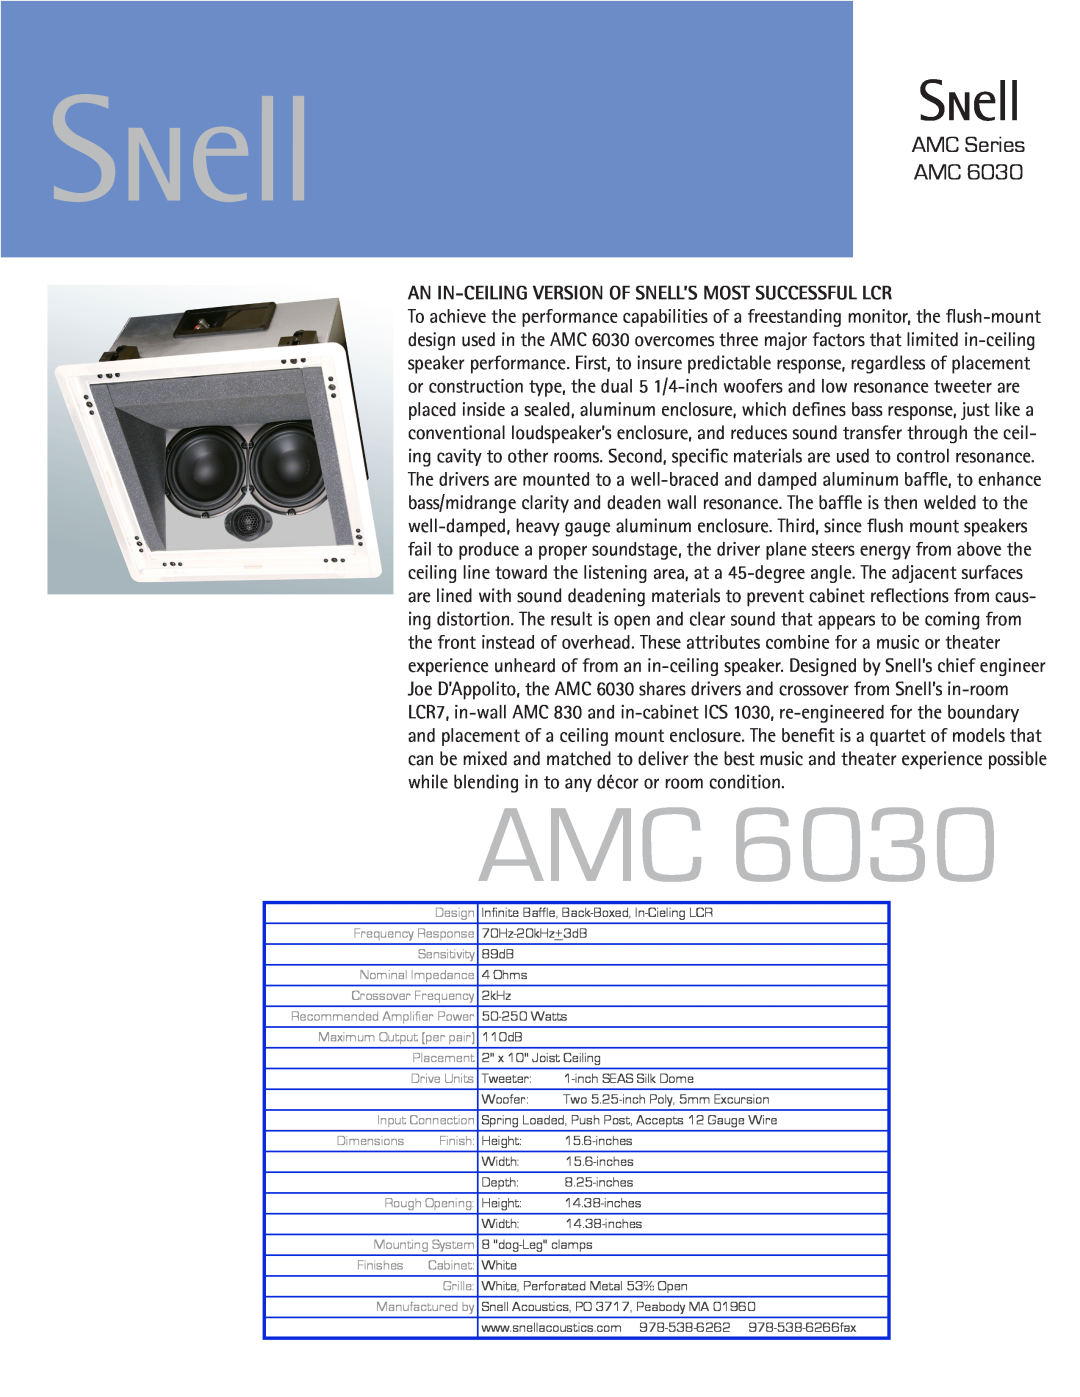 Snell Acoustics AMC 6030 dimensions AMC Series AMC, while blending in to any décor or room condition 